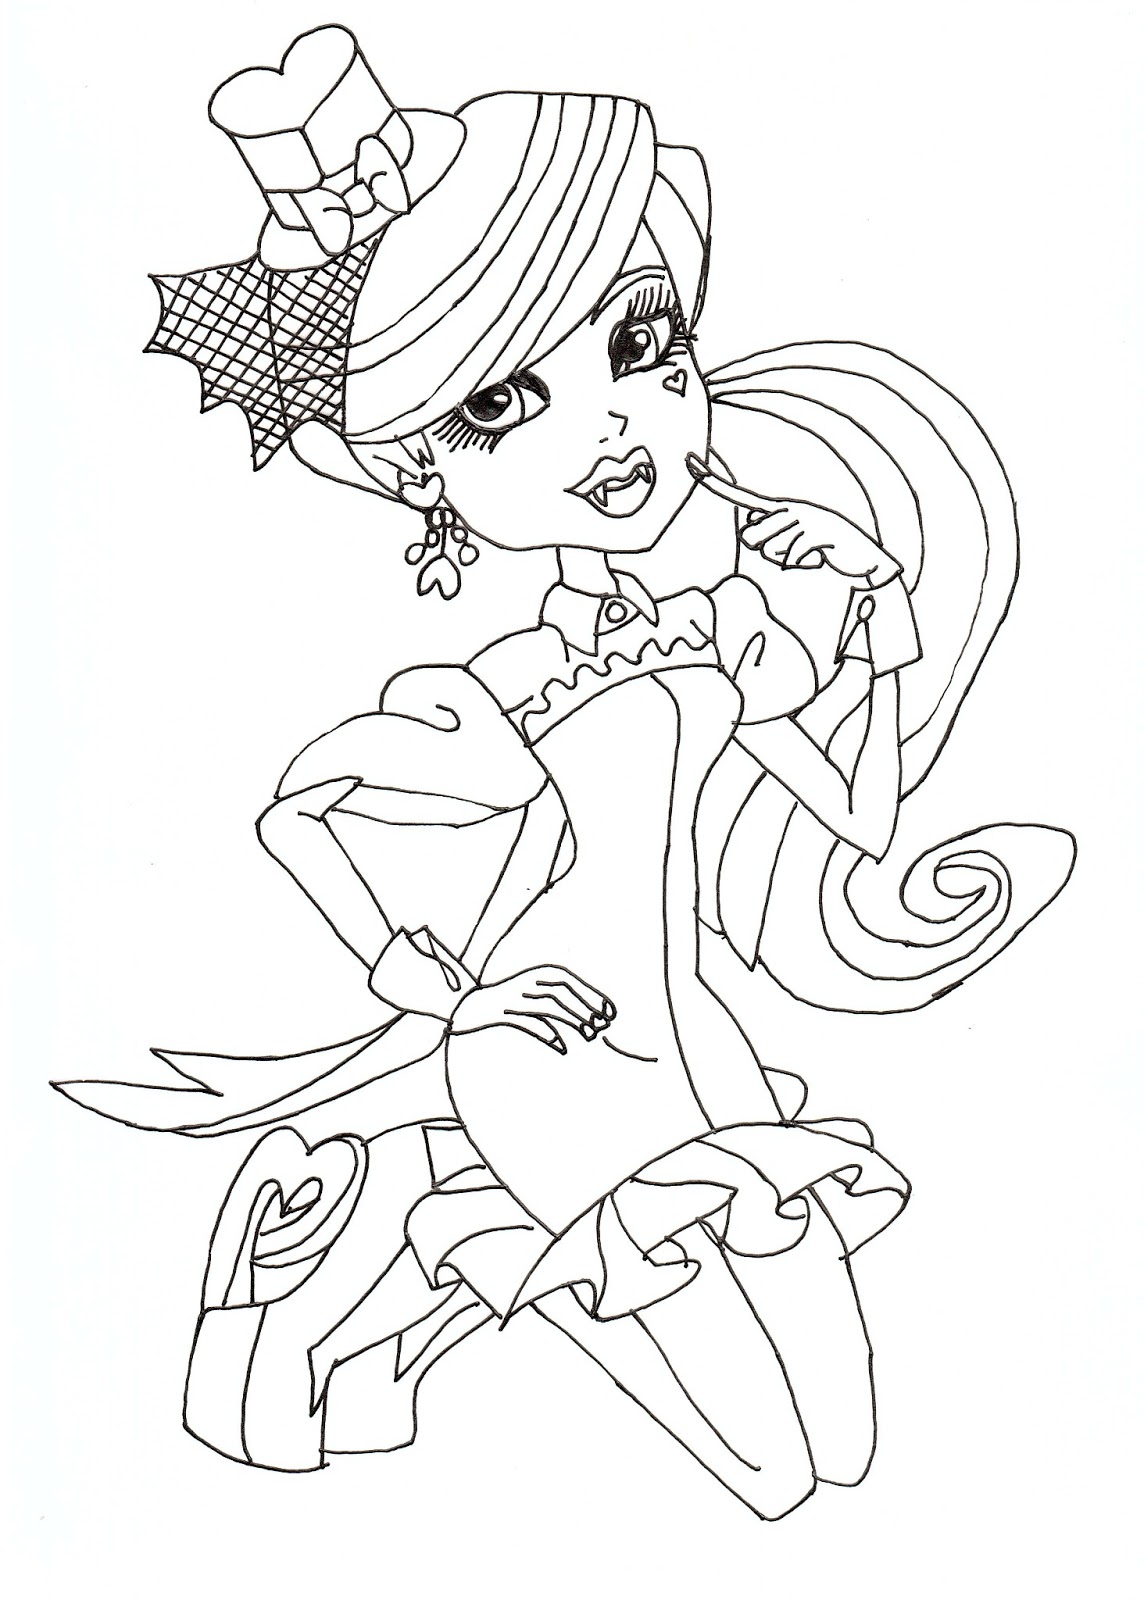 Download Free Printable Monster High Coloring Pages: Draculaura Dawn of the Dance Coloring Sheet